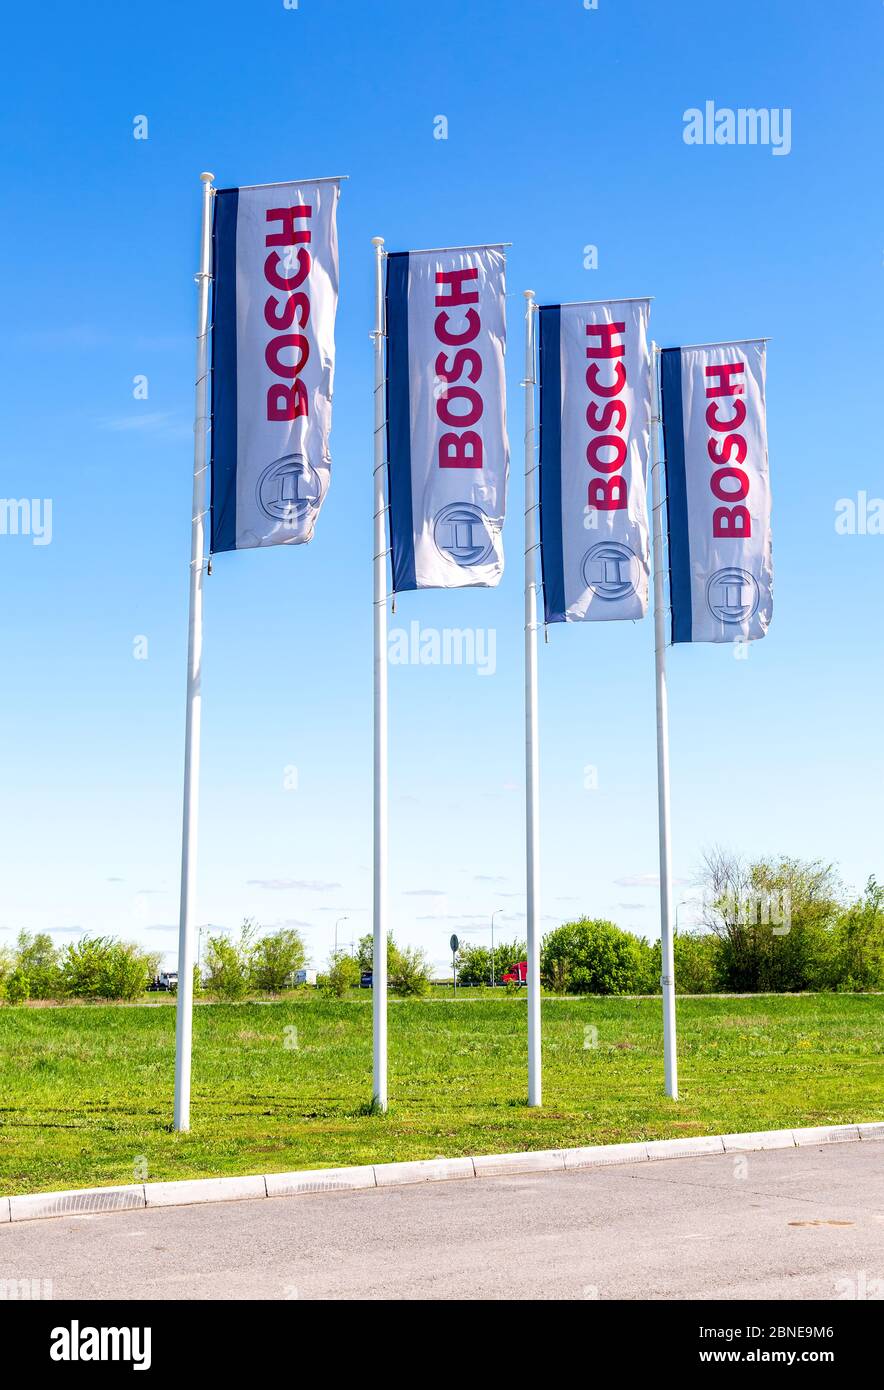 Samara, Russia - May 14, 2020: Flags with emblem Bosch against the blue  sky. Robert Bosch LLC is a multinational engineering and electronics  company Stock Photo - Alamy